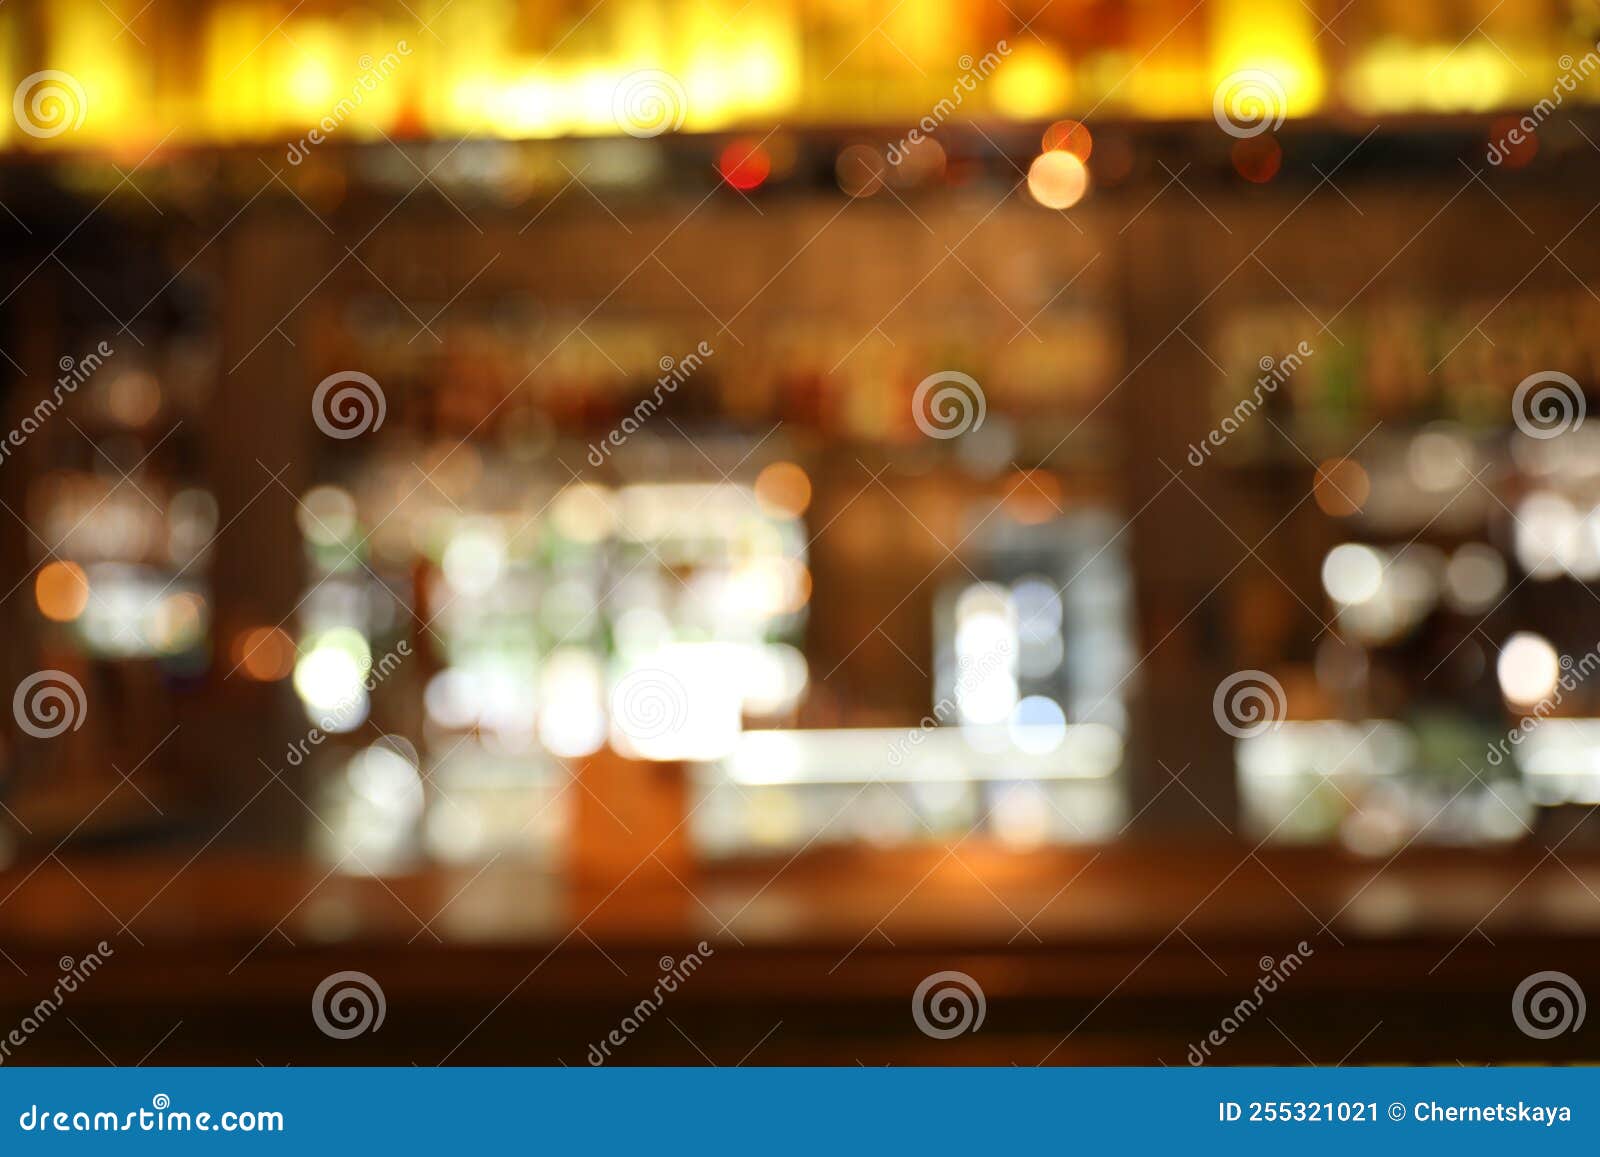 Blurred View of Bar Counter in Cafe Stock Image - Image of empty, blur ...